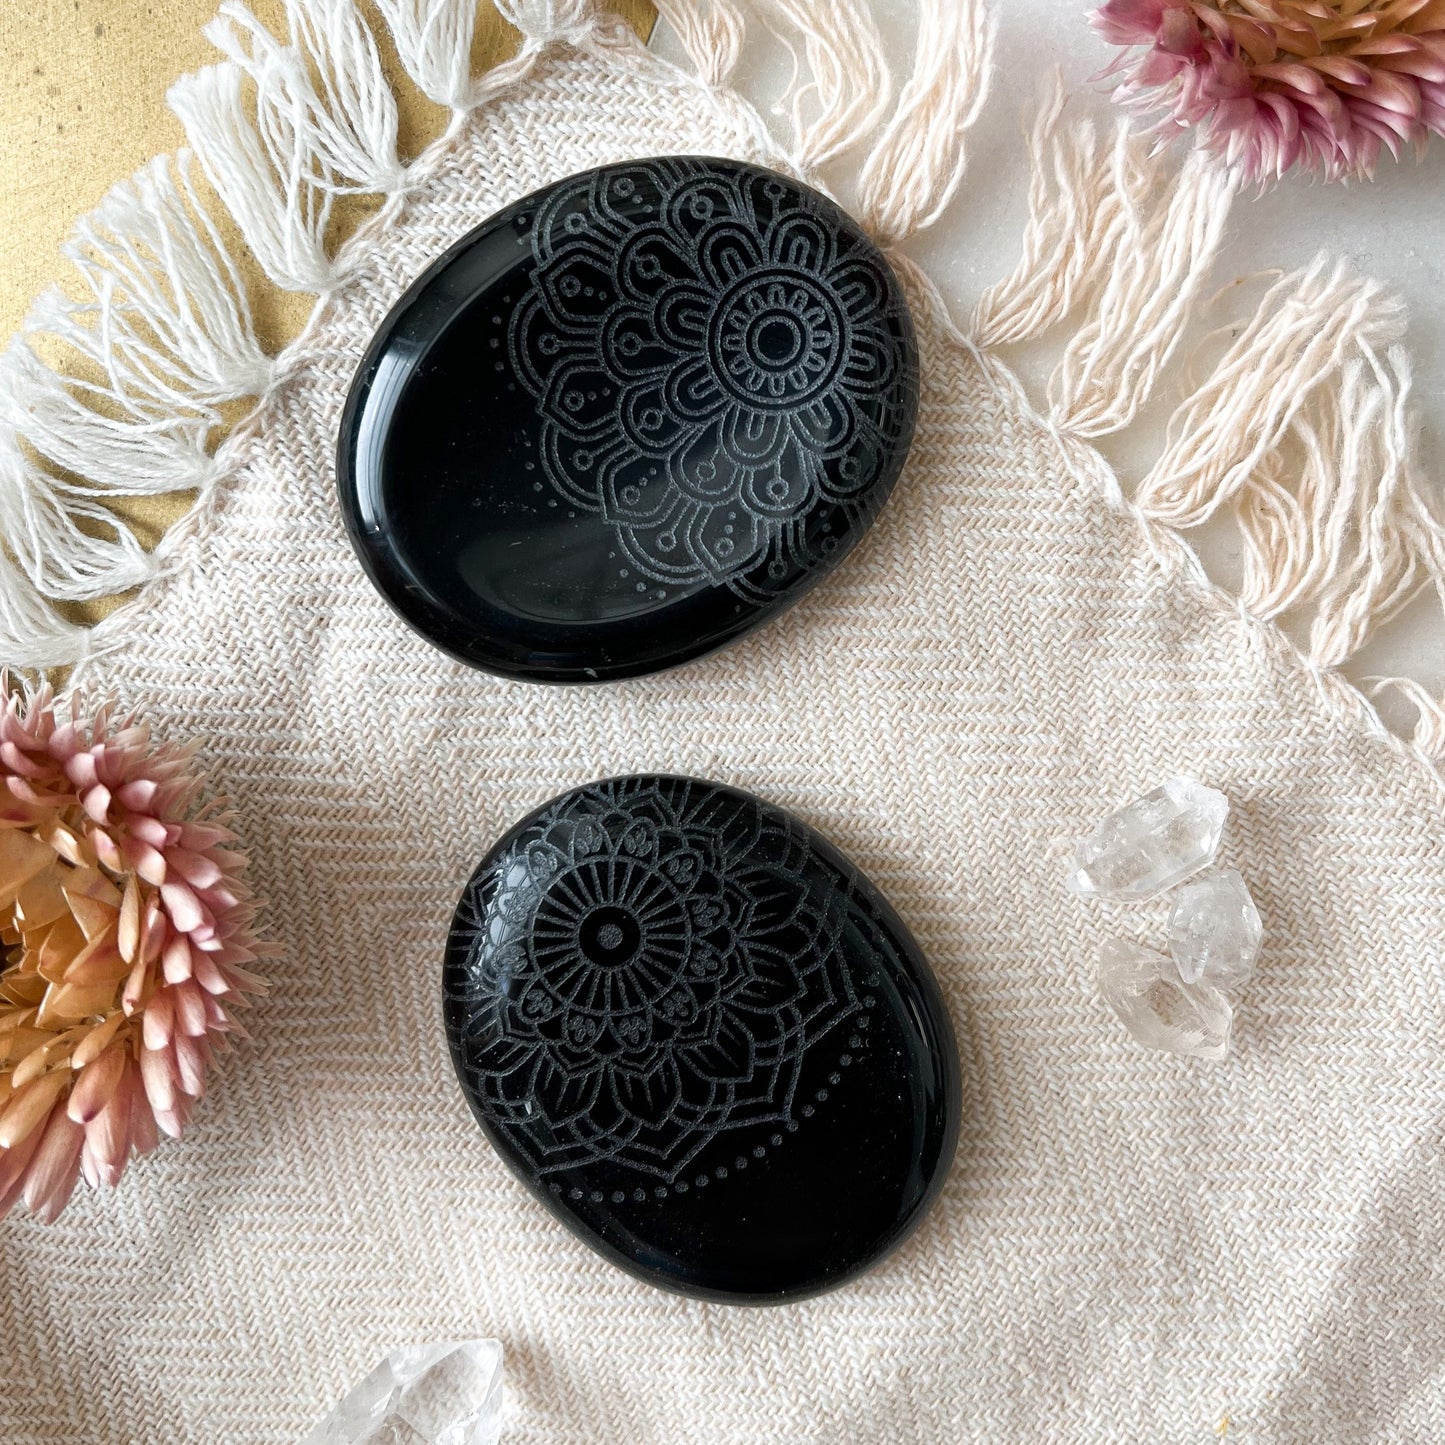 Etched Obsidian Worry Stones - Various Mandalas - Fractalista Designs